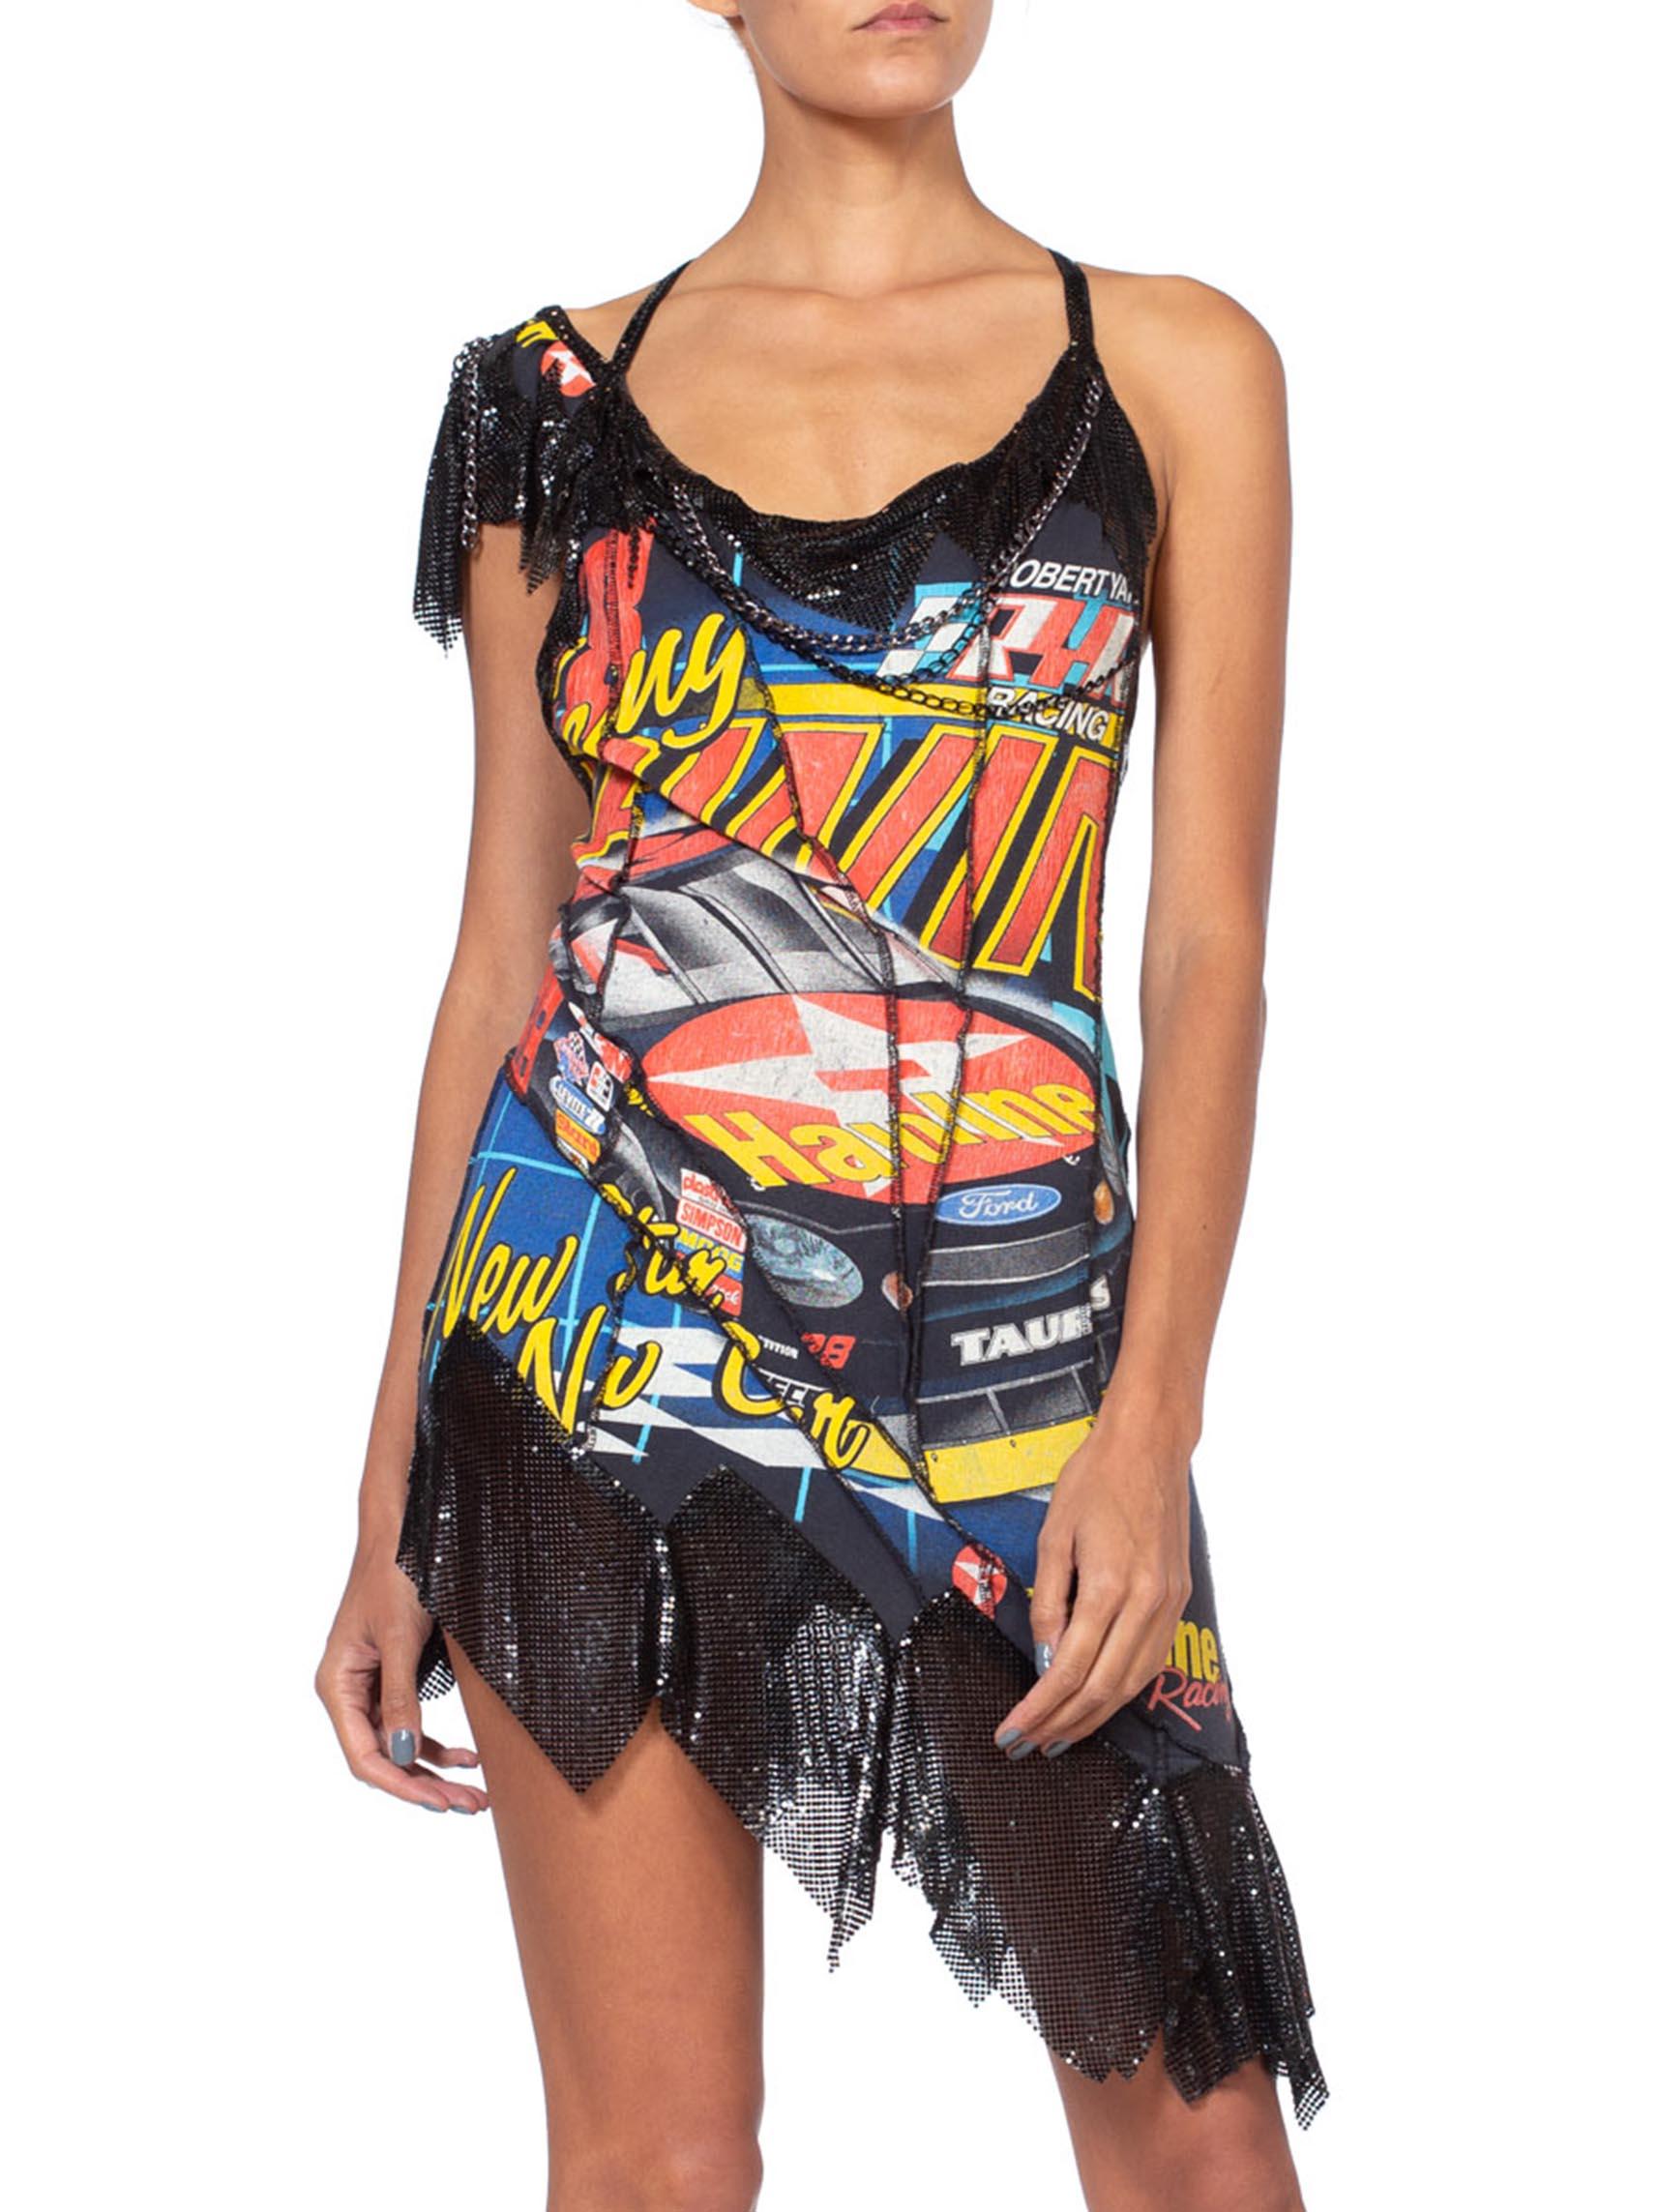 Women's Morphew Collection Vintage 90's Nascar Metal Mesh T-Shirt Dress With Chains For Sale